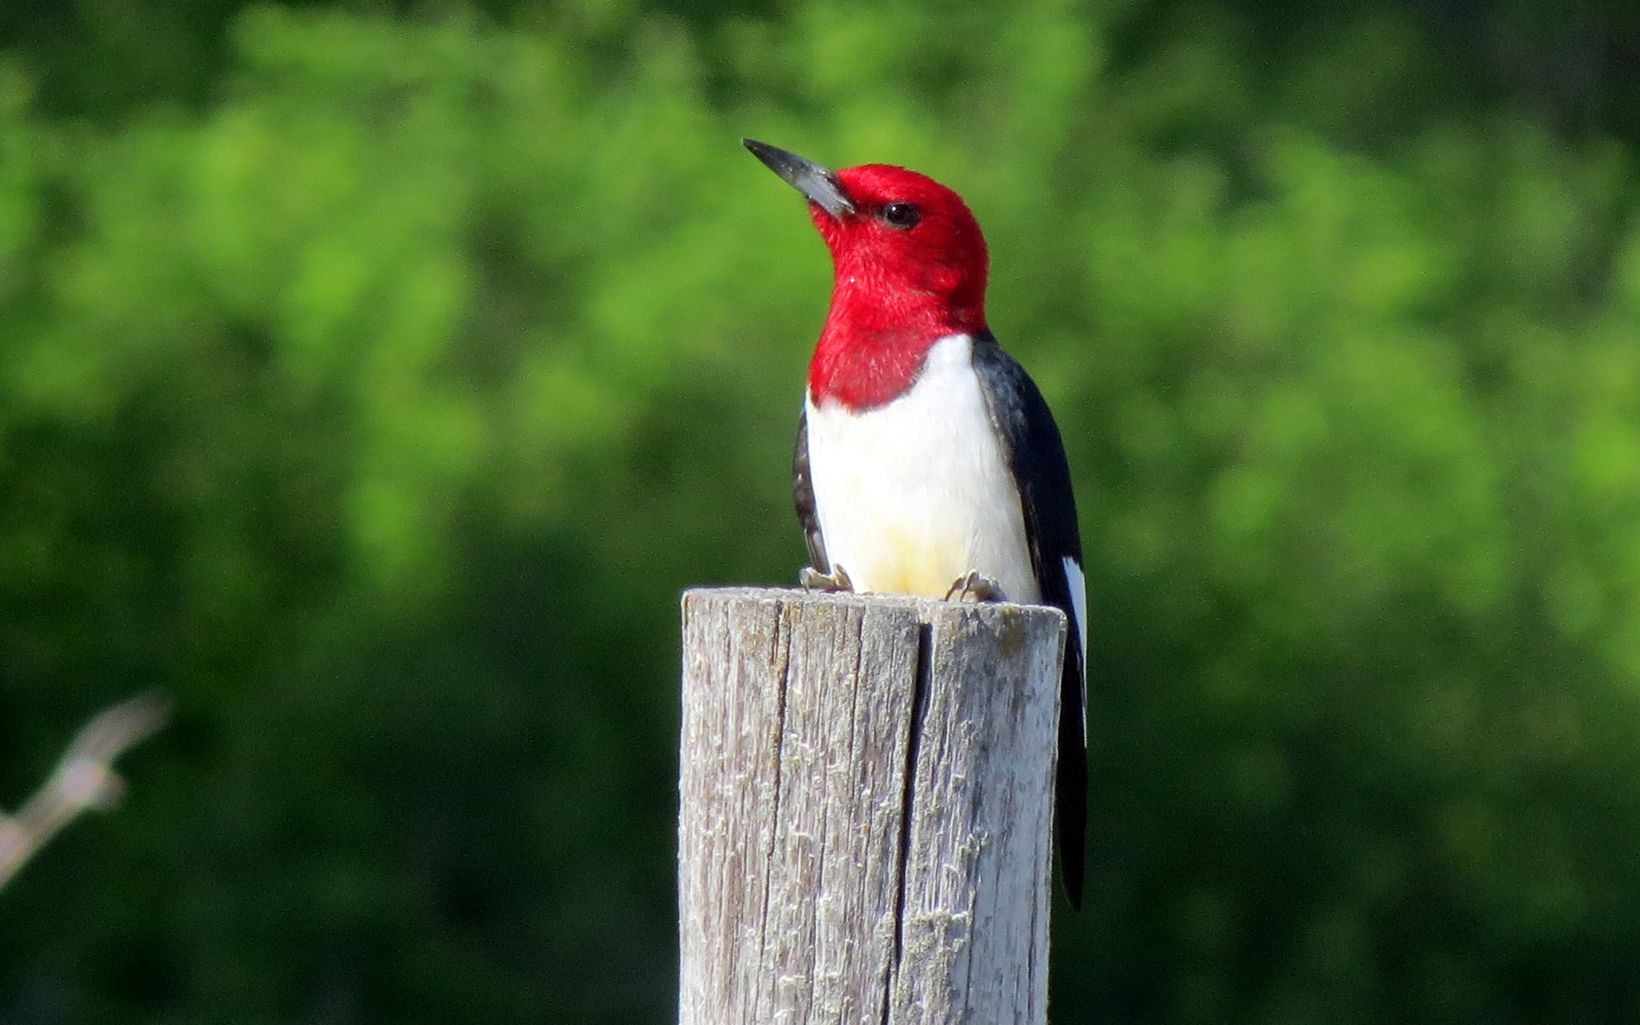 Red-headed Woodpecker These birds can be seen nesting and foraging in dead trees and rotting logs at the prairie's edge. © NickVarvel, CC BY 2.0